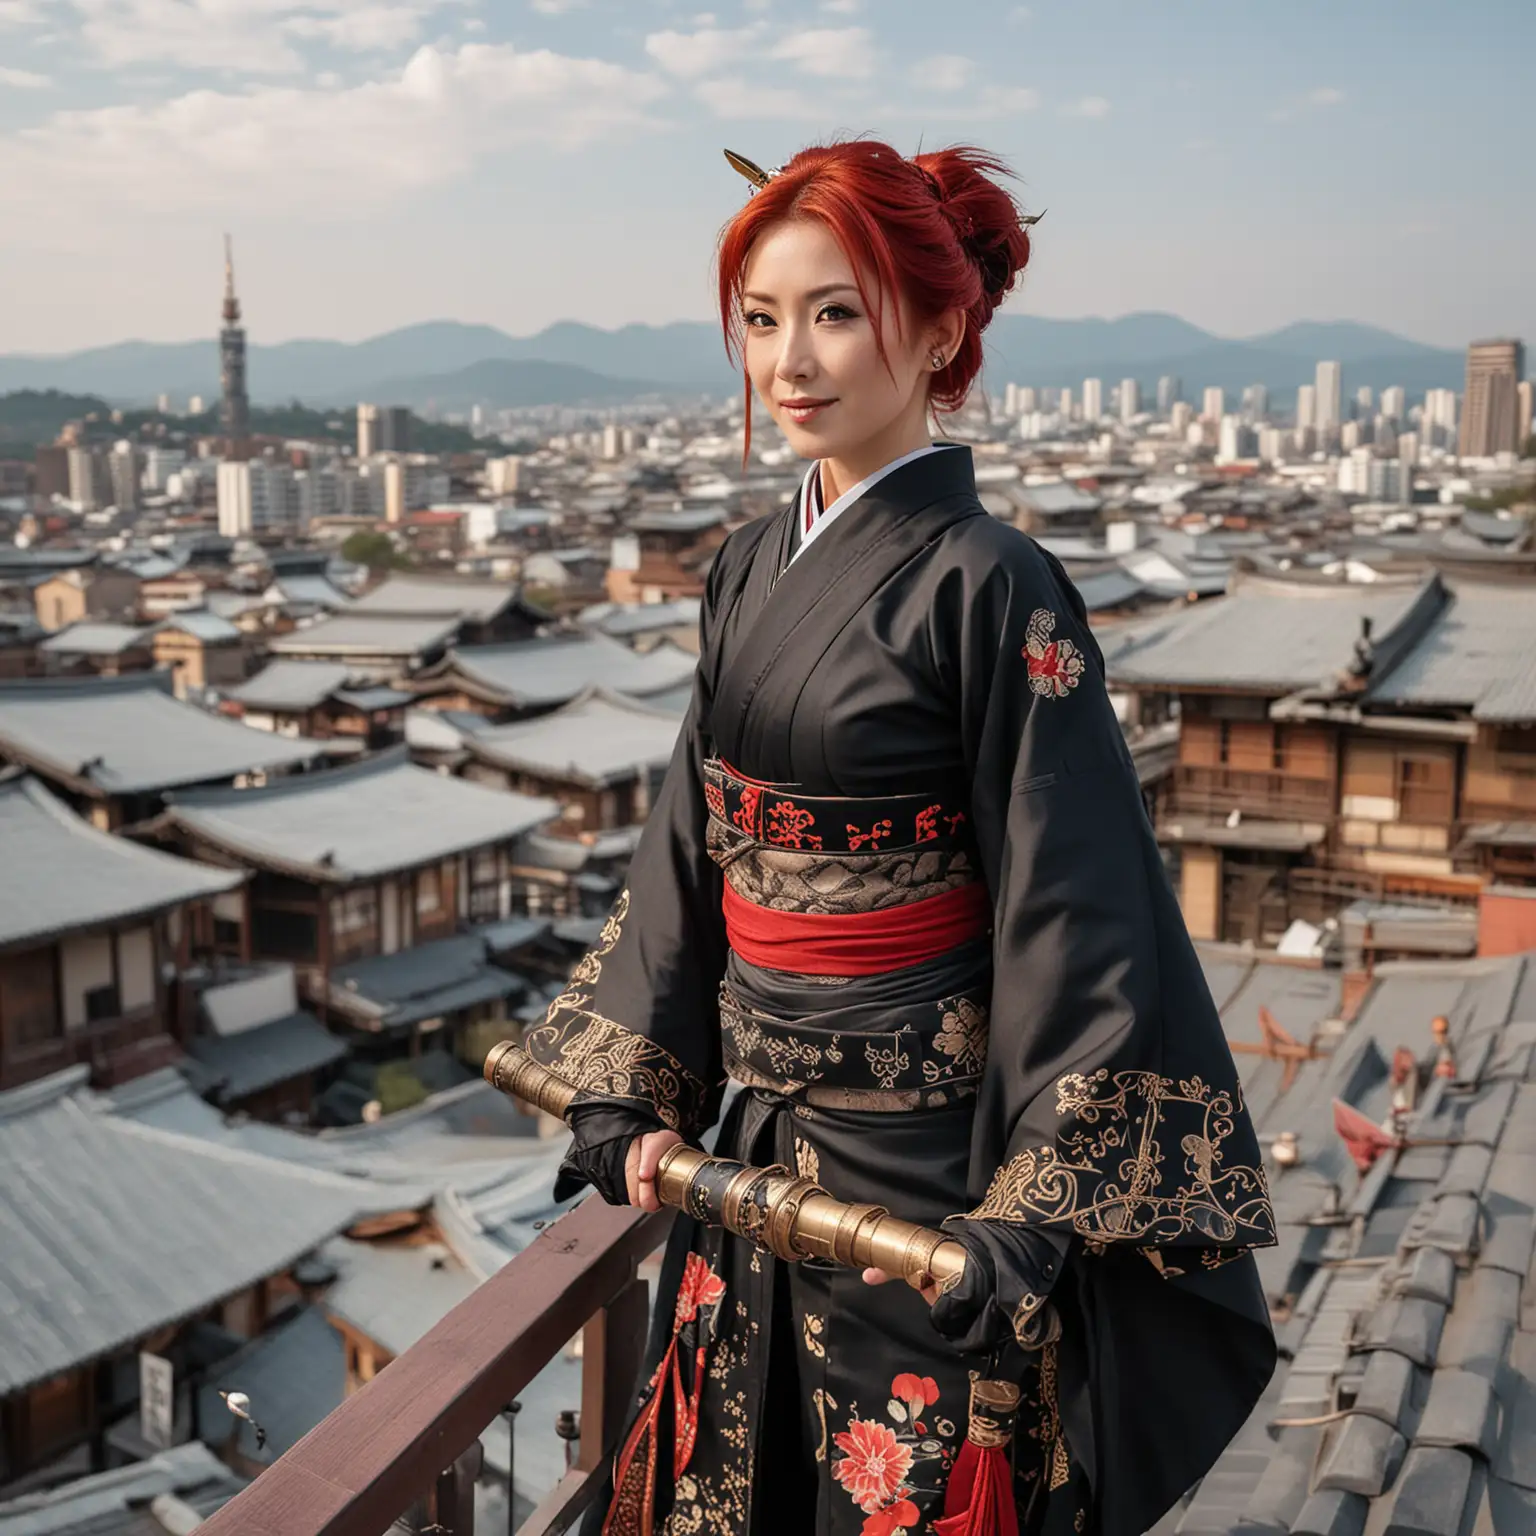 A petite, 40 year old ukrainian-Japanese woman with red hair. She is dressed as a steampunk geisha. she is on a rooftop looking over steampunk Kyoto. She has a half smile, and is wearing katanas as she is a swordswoman too